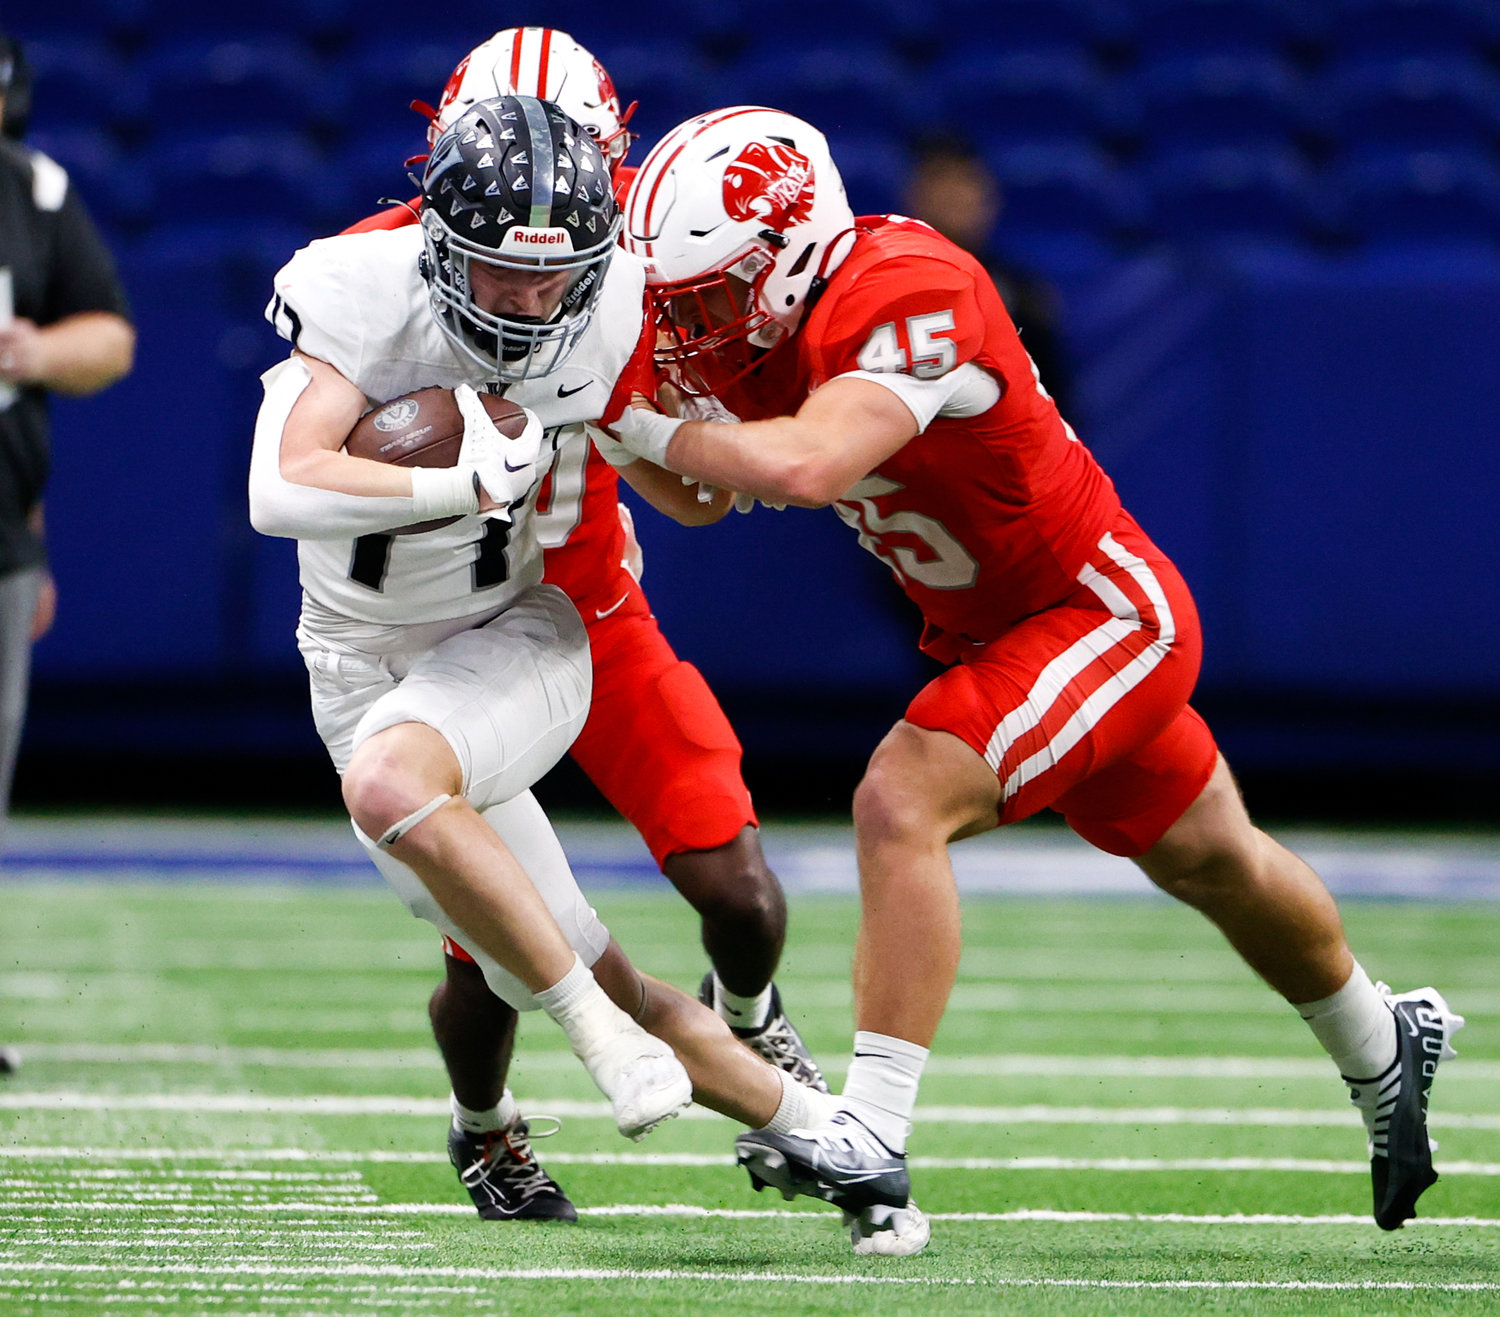 Katy linebacker Blake German (45) pushes Vandegrift Vipers senior wide receiver Beck Ormond (17) out of bounds after a catch during the Class 6A-DII state semifinal football game between Katy and Vandegrift on Dec. 10, 2022 in San Antonio.